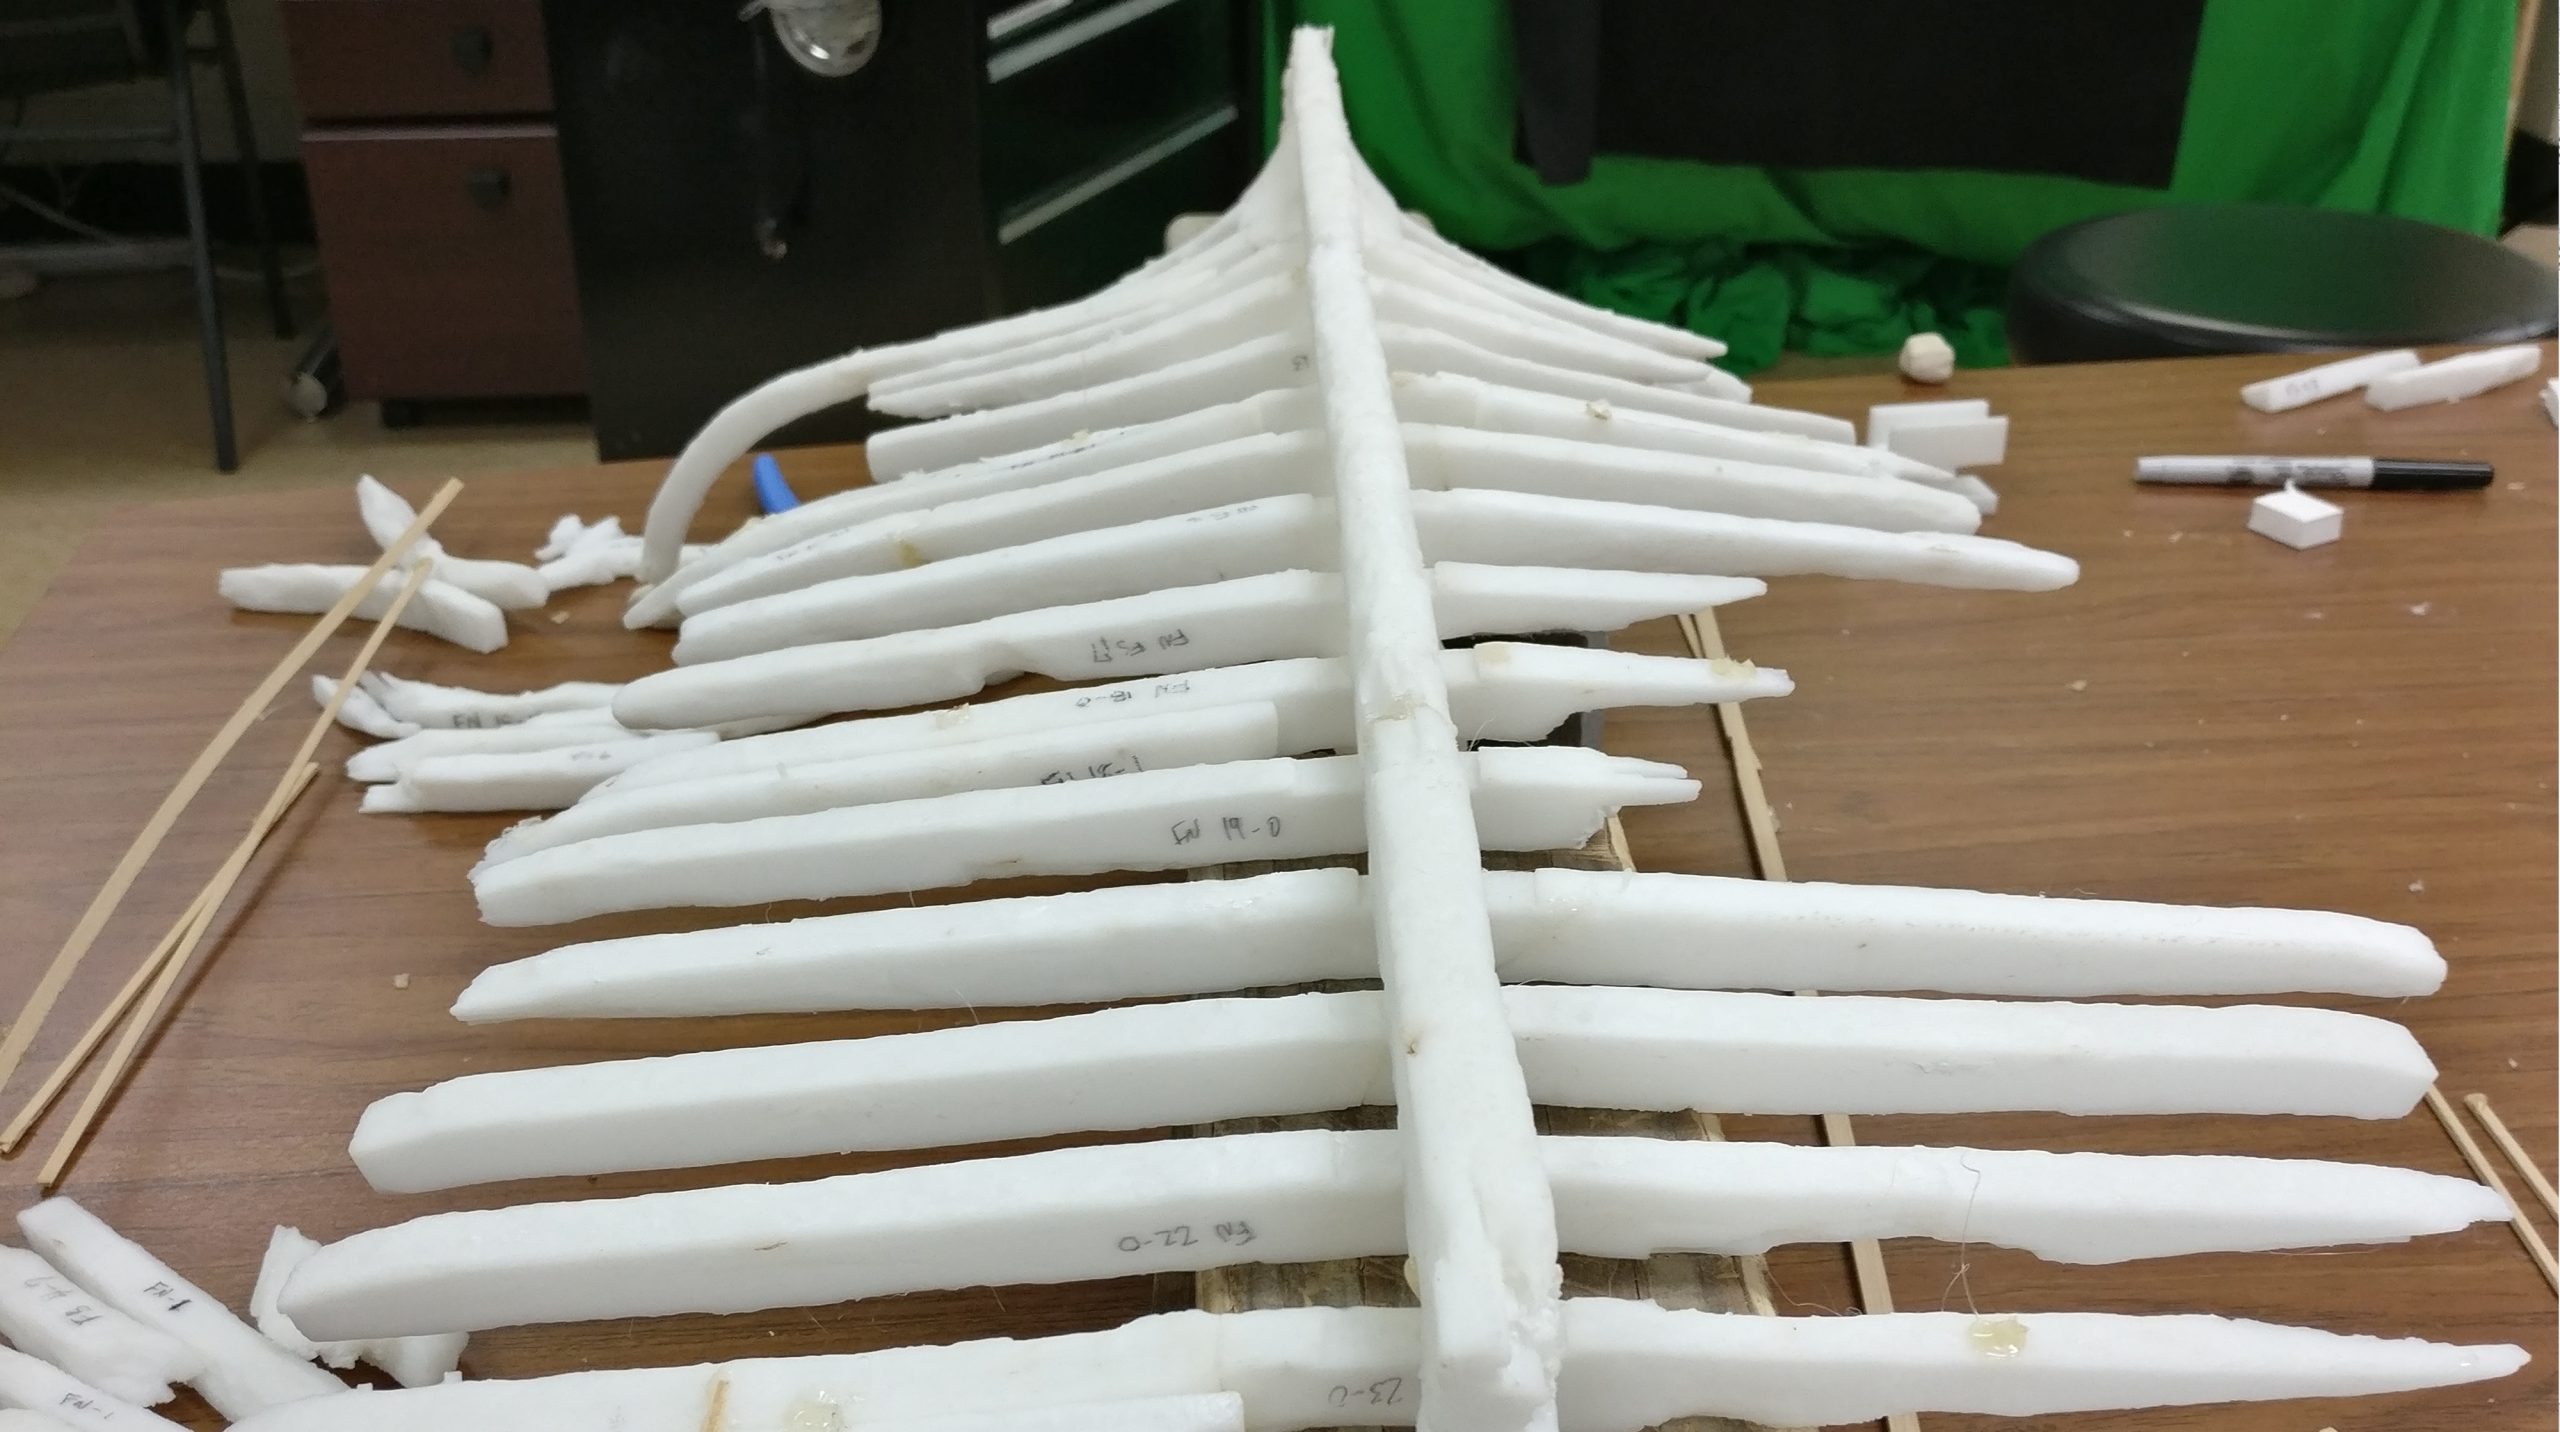 3-D model printed copy of the ship remains